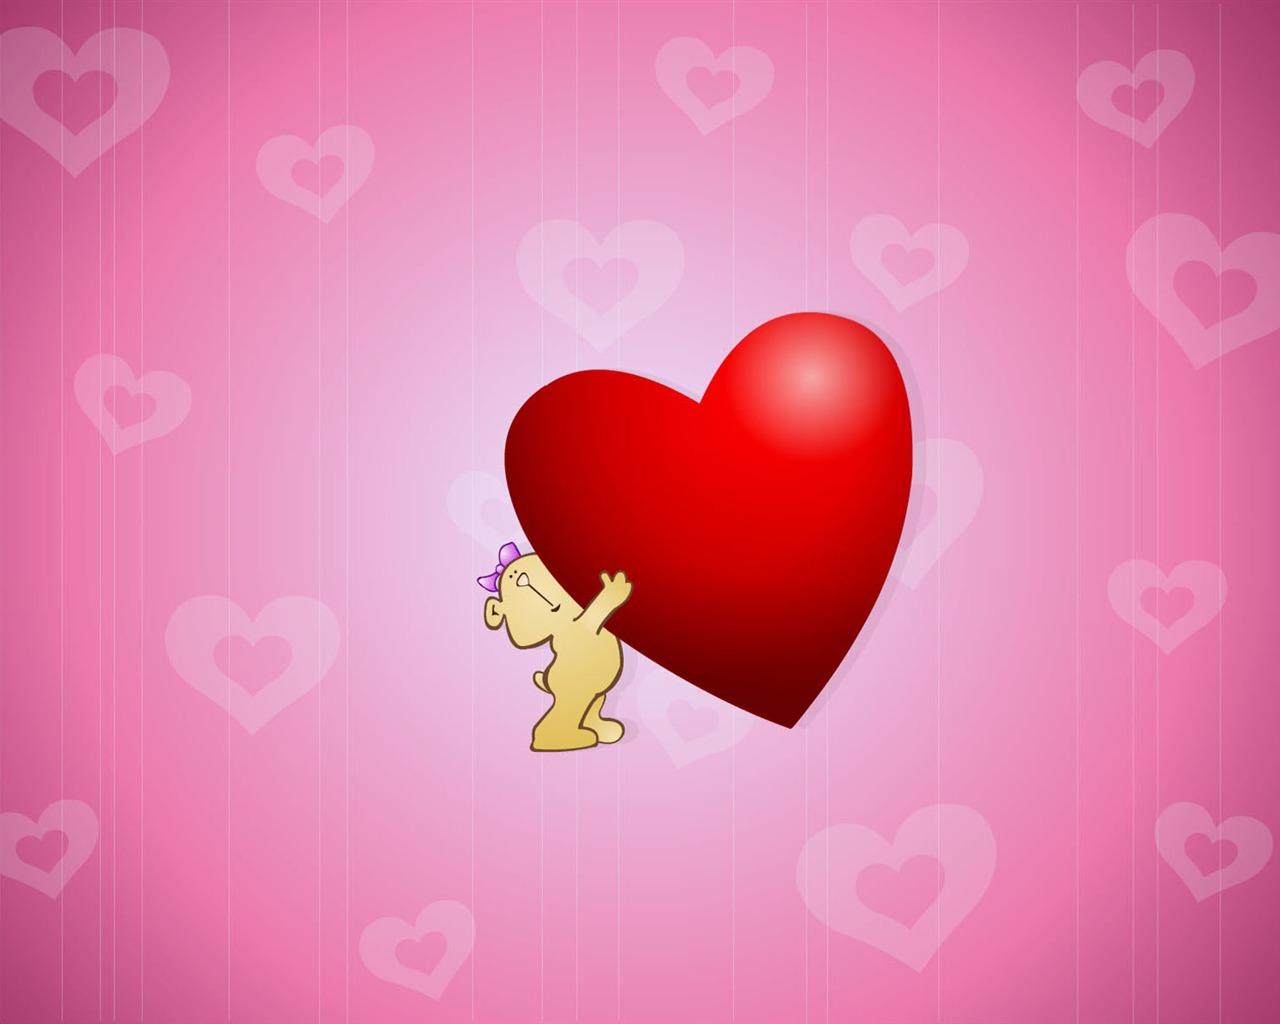 Valentine's Day Theme Wallpapers (3) #8 - 1280x1024